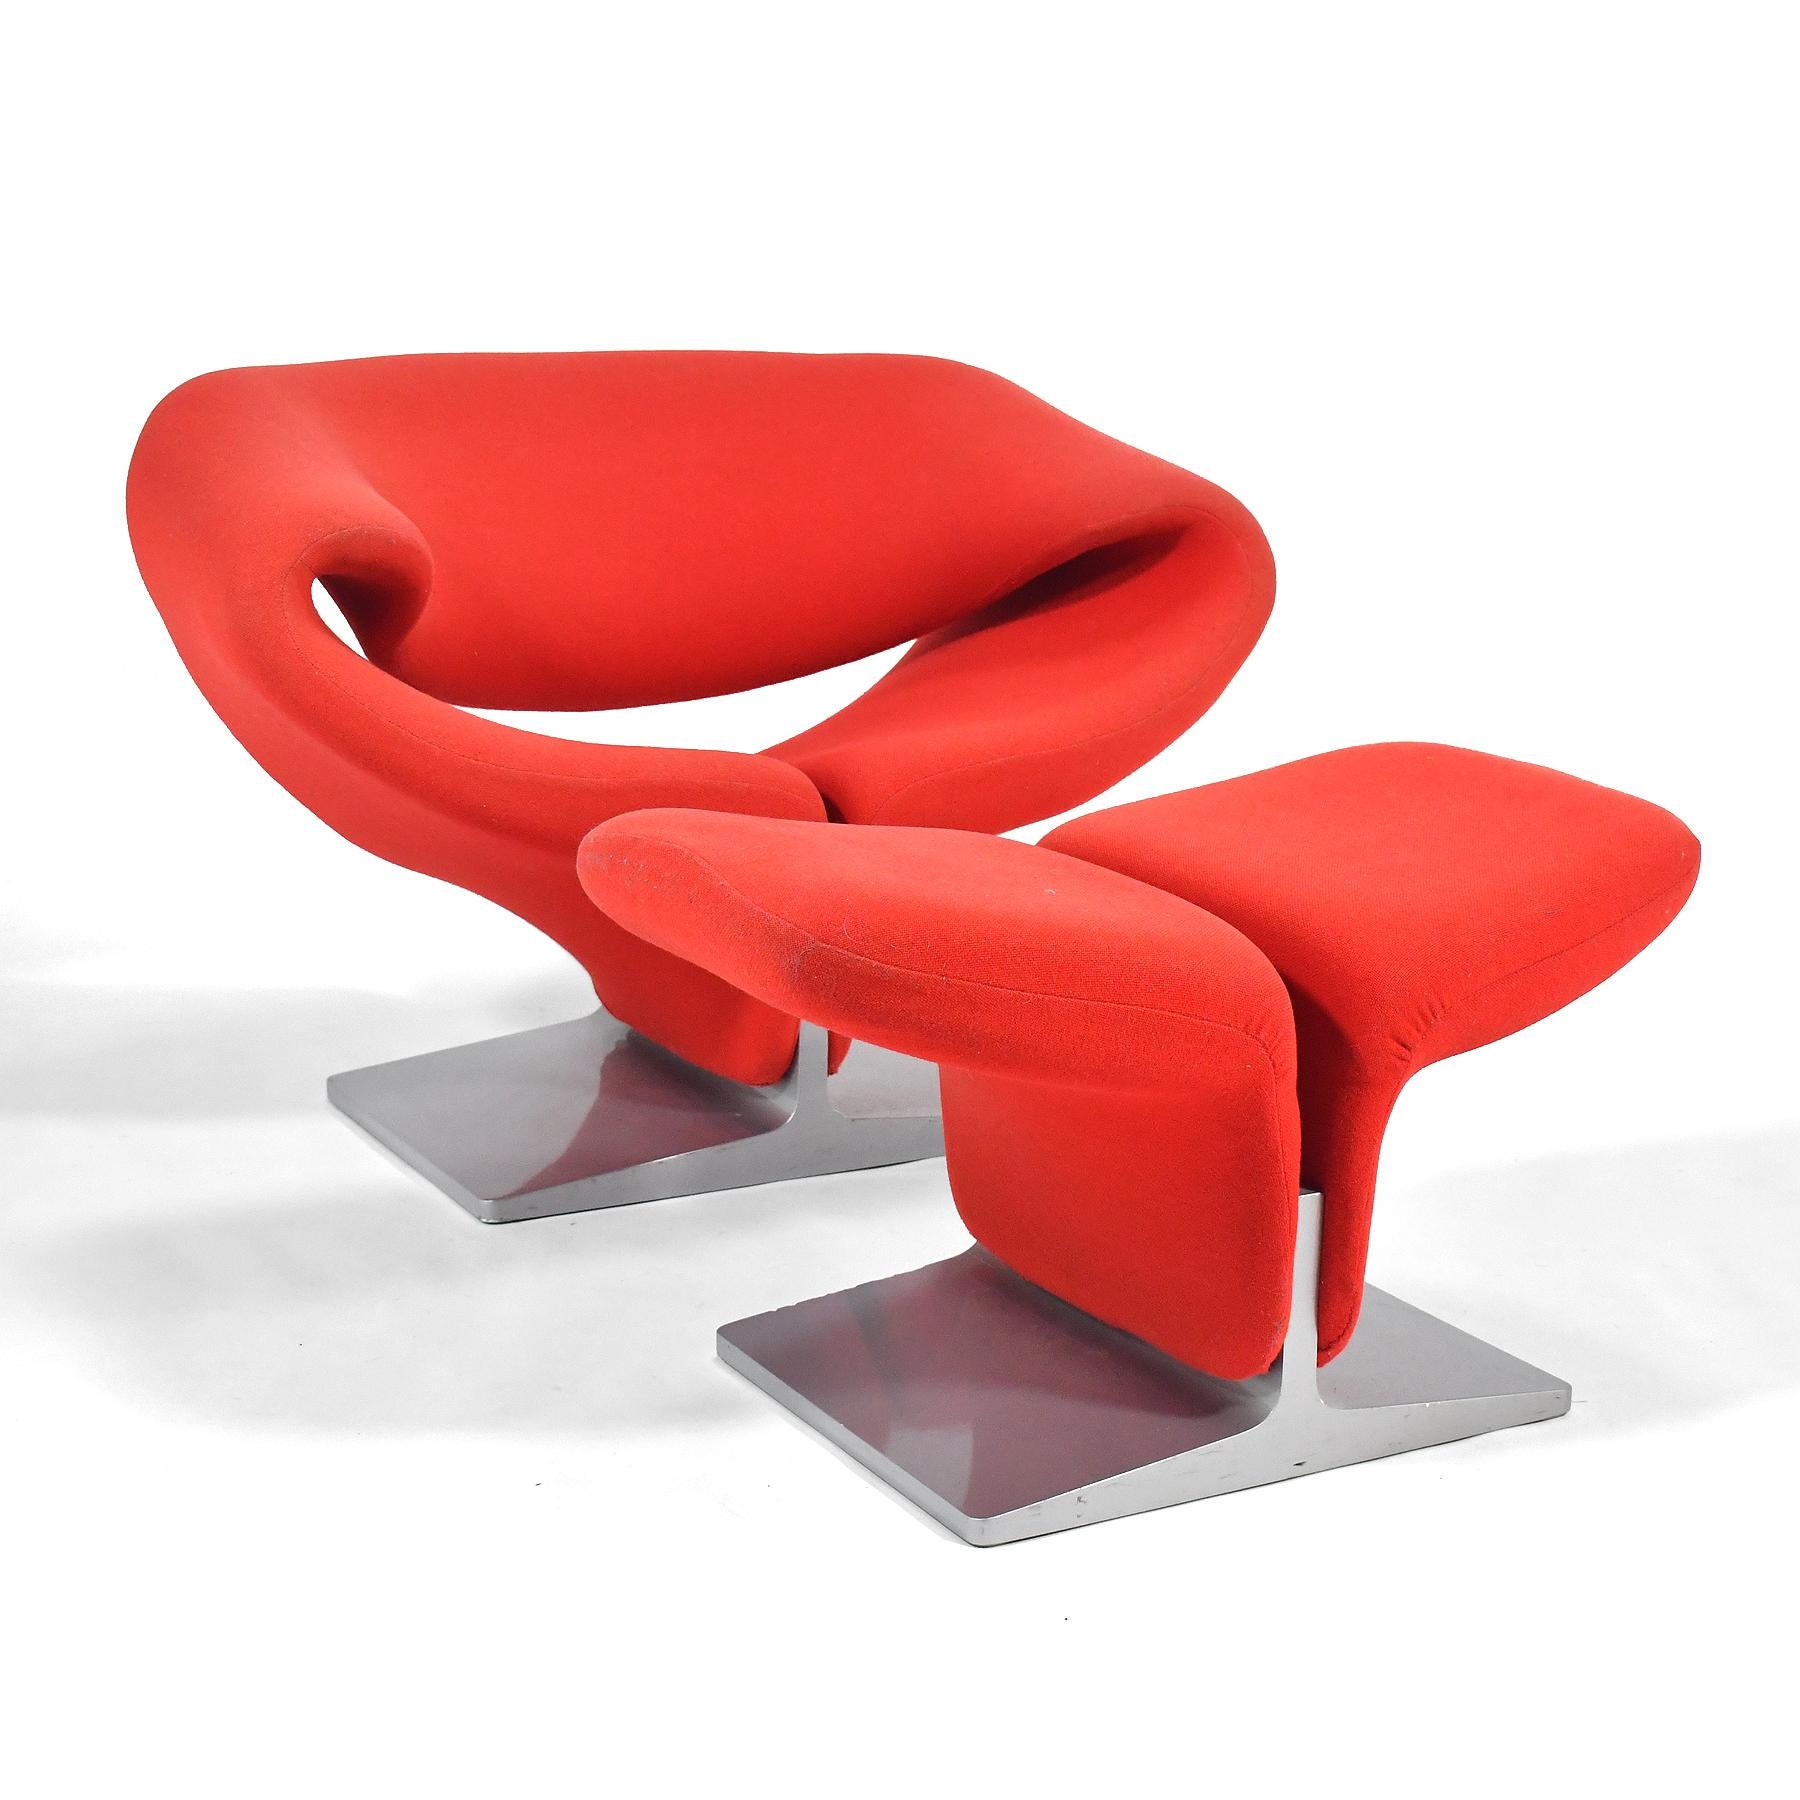 A sensuous design of sublime simplicity, the ribbon chair by Pierre Paulin is as comfortable as it is beautiful. This beautiful example by Artifort is upholstered in red fabric and comes complete with a matching ottoman, both pieces sport silver